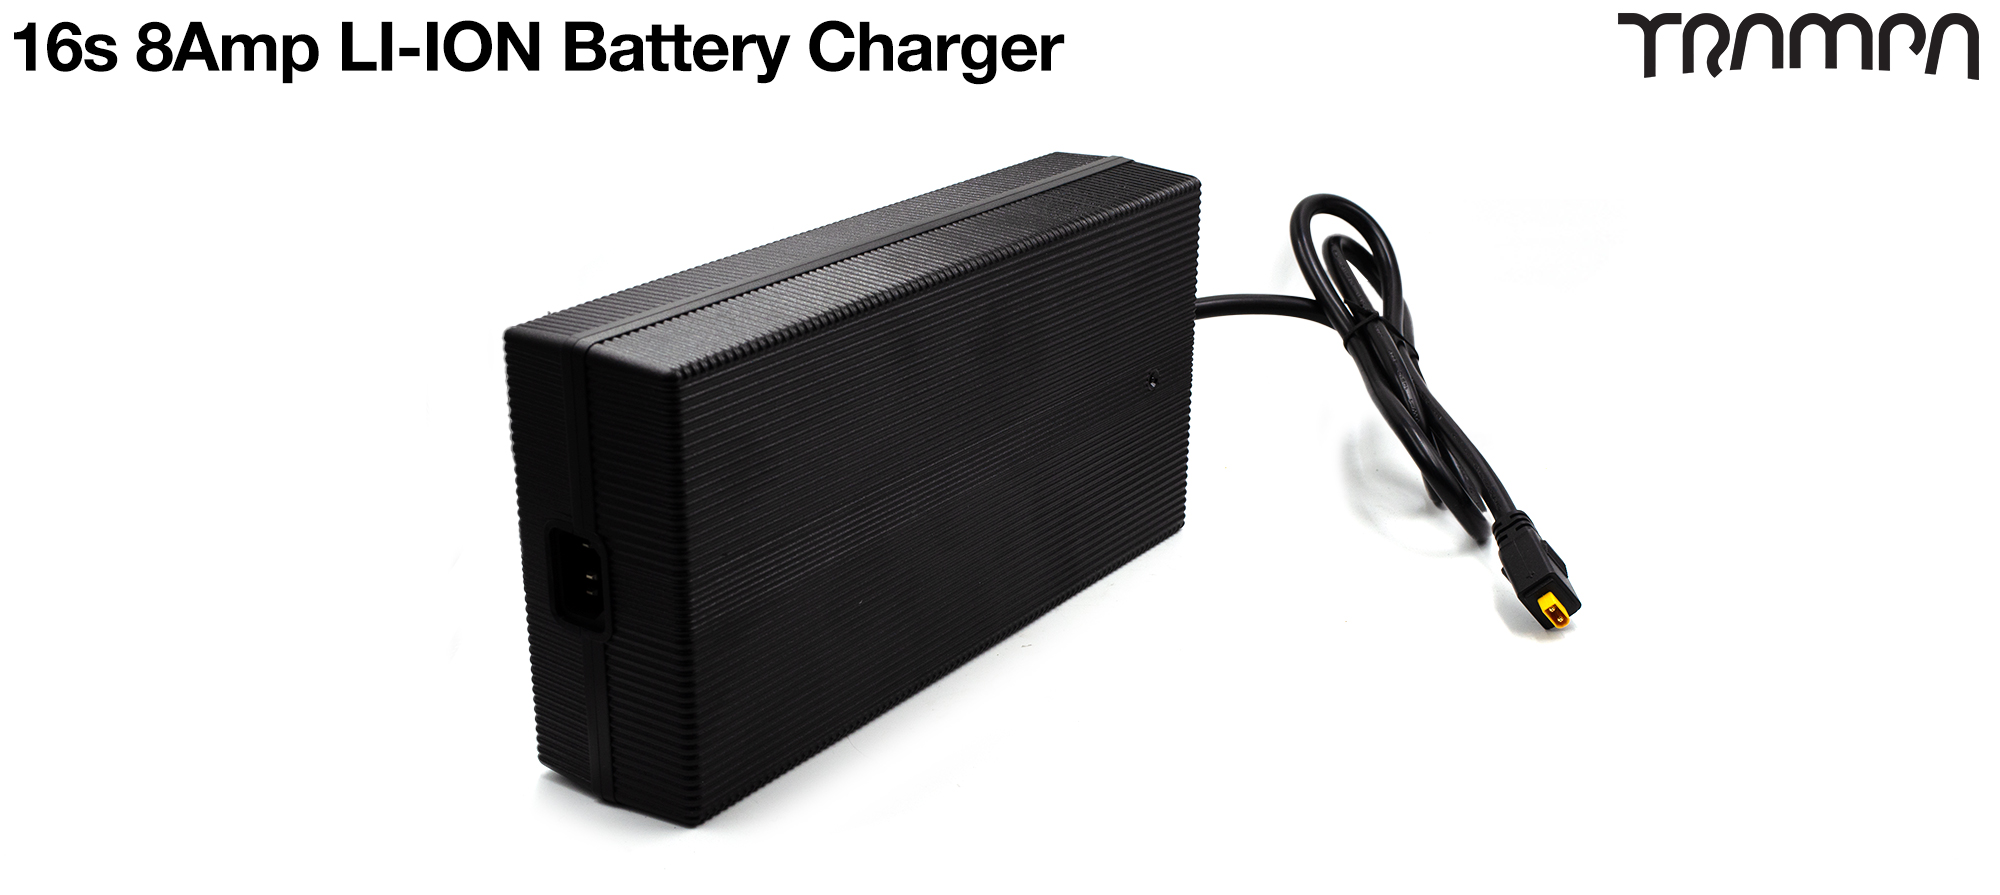 YES - Please supply an 6A 12s Li-ion Charger 